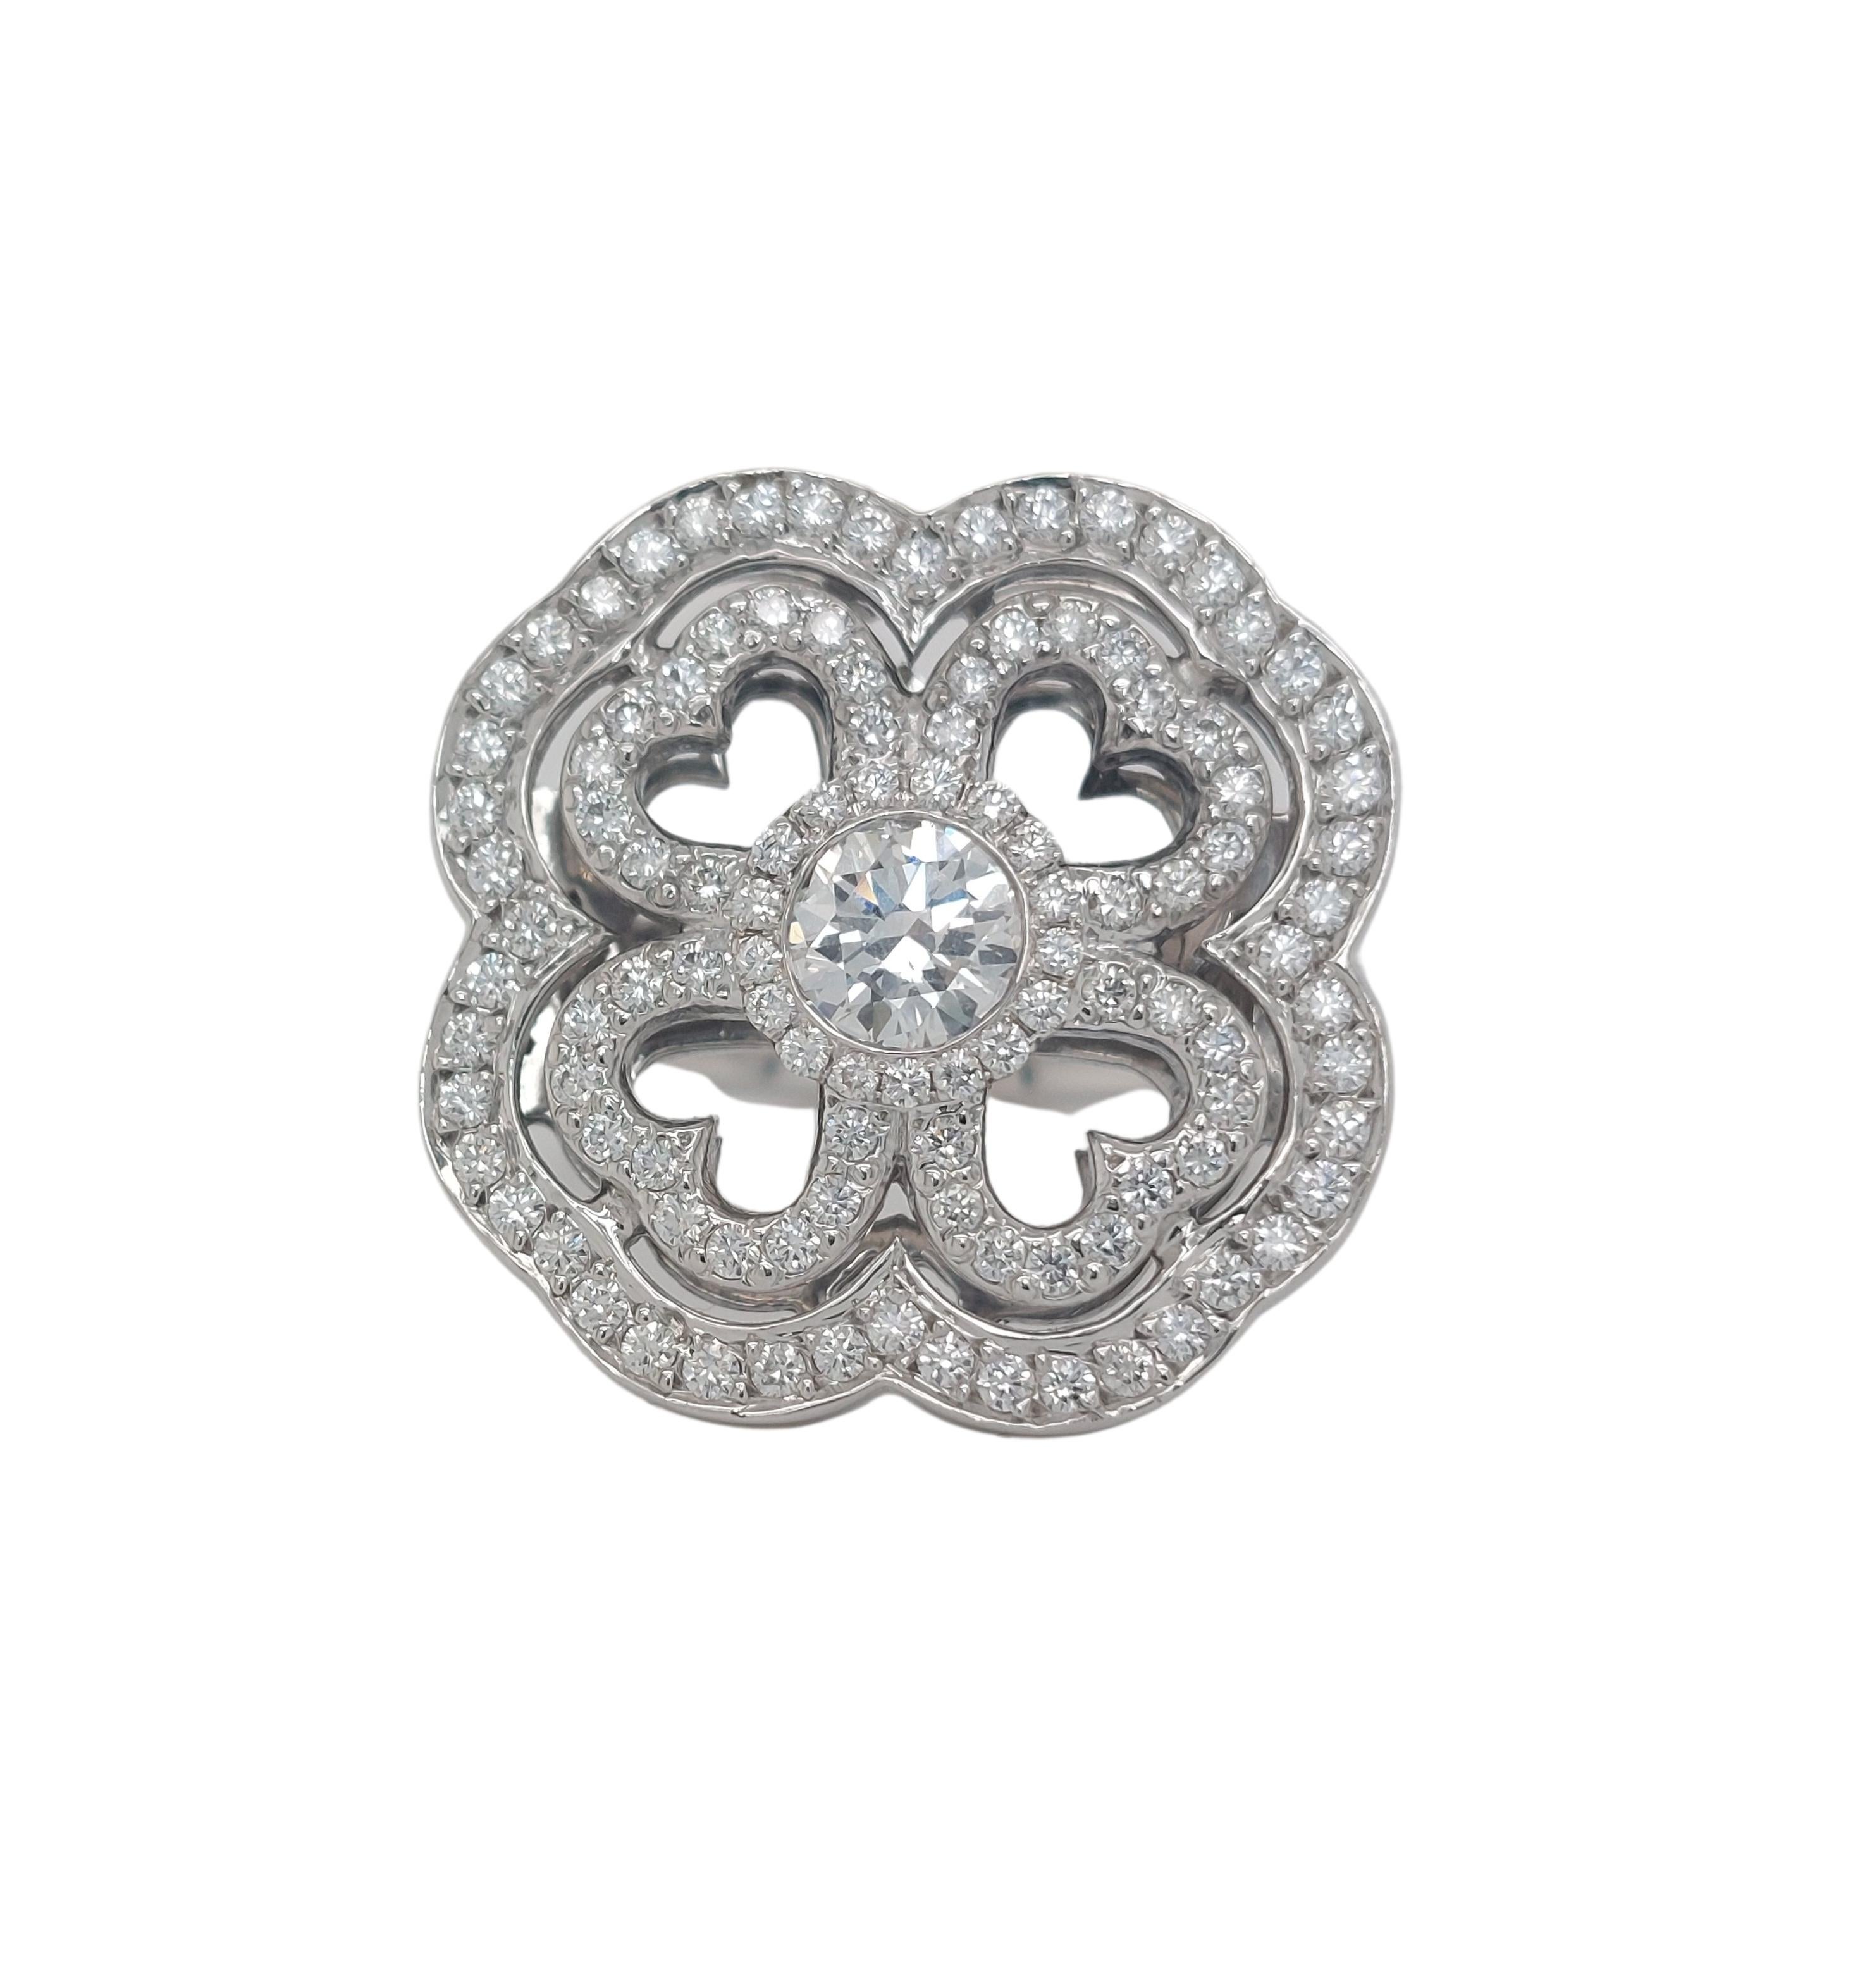 Gorgeous 18kt White Gold Clover / Heart Ring with 0.38ct Solitary Diamonds and 0.58ct Surrounding Diamonds

Diamonds: 1 solitary brilliant cut diamond 0.38ct,  Surrounding small brilliant cut diamonds together approx. 0.58ct

Material: 18kt white